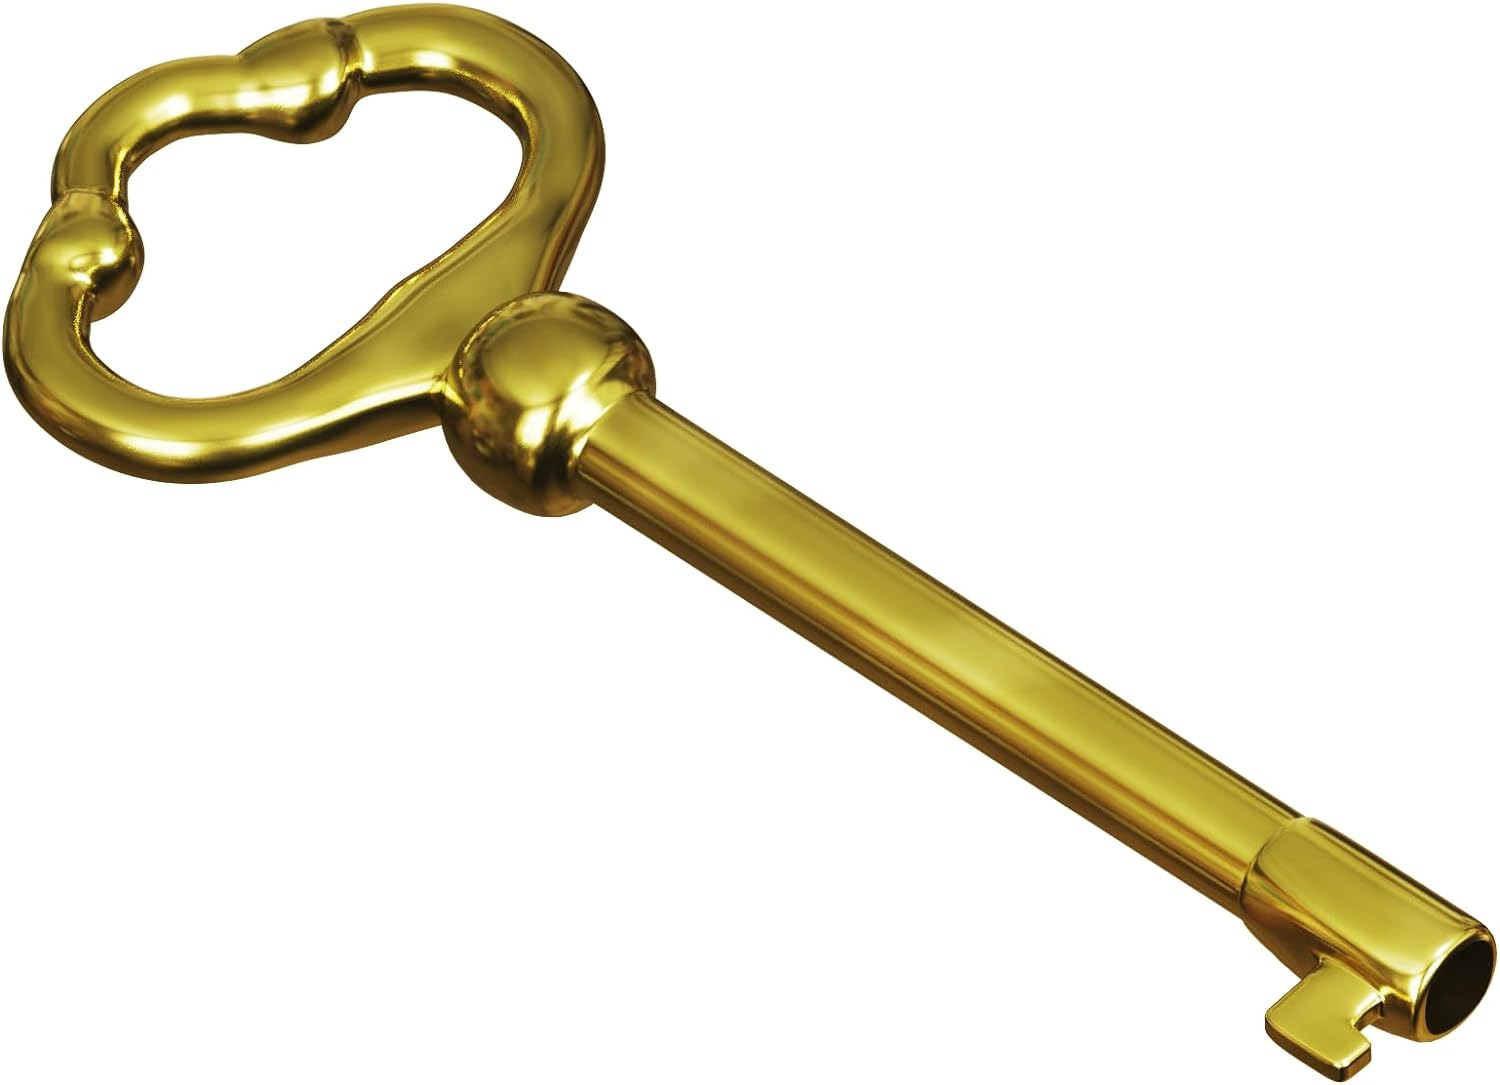 KY-2 Skeleton Key Reproduction Brass Plate Hollow Barrel Key for Cabinets, Drawe